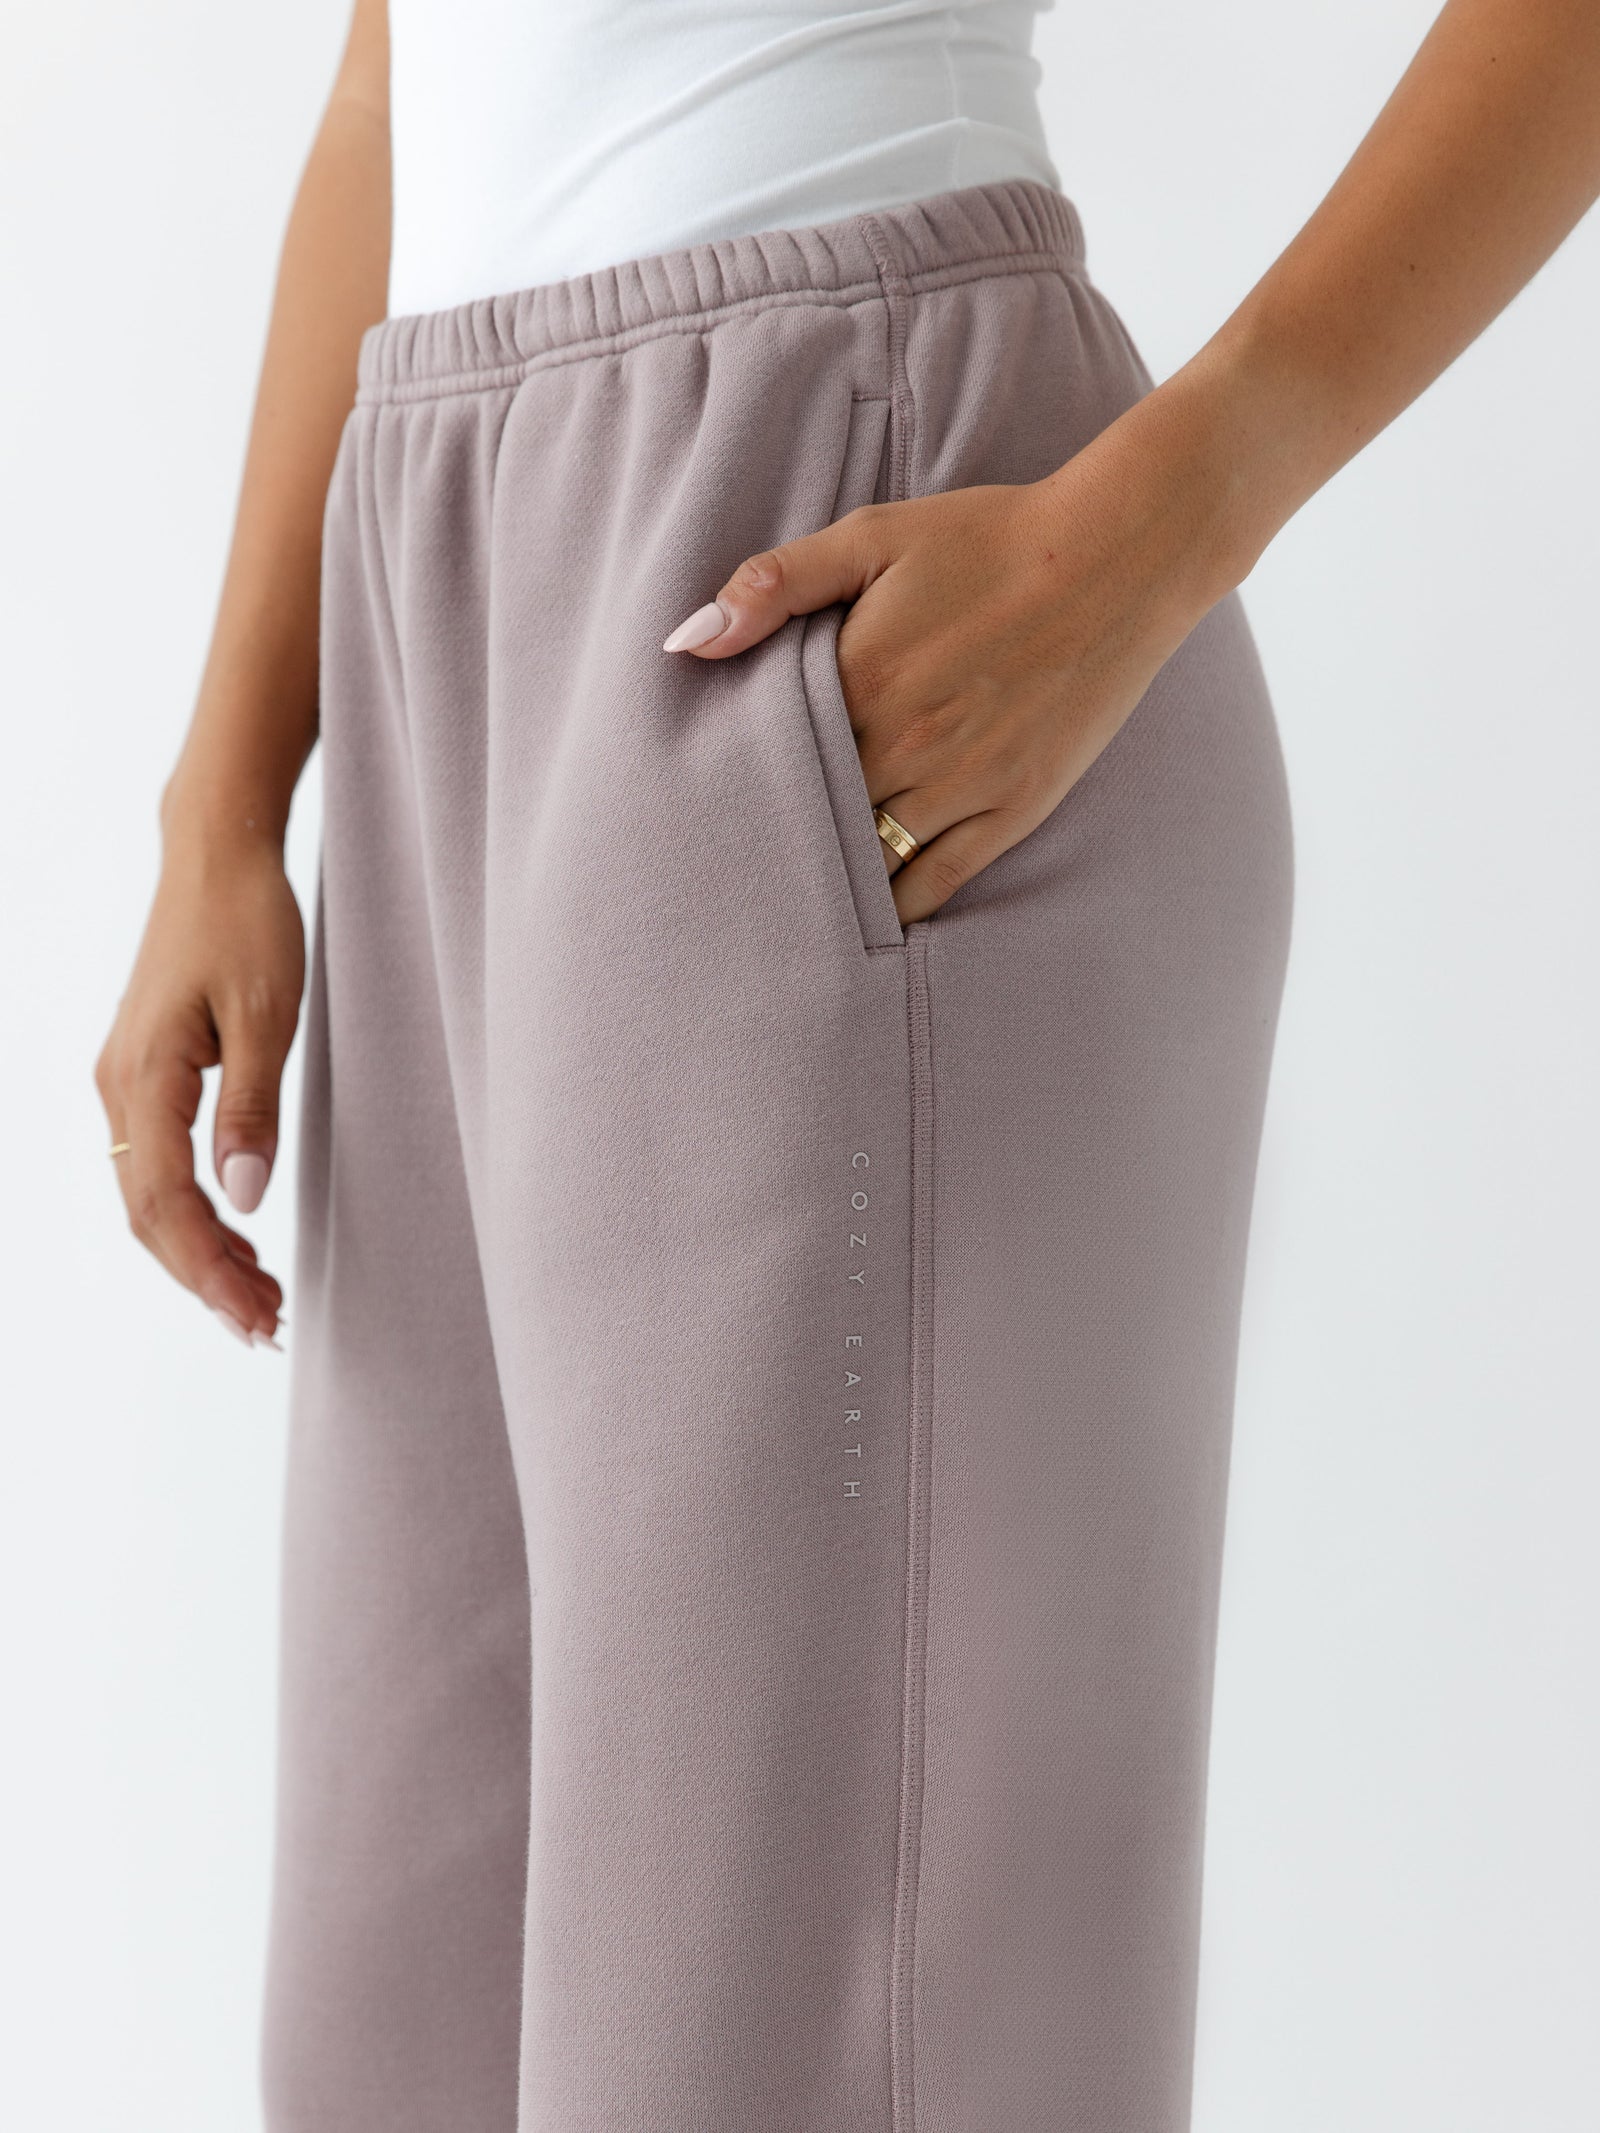 Dusty Orchid CityScape Joggers. The Joggers are being worn by a female model. The photo is taken from the waist down with the models hand in the pocket of the joggers. The back ground is white. 